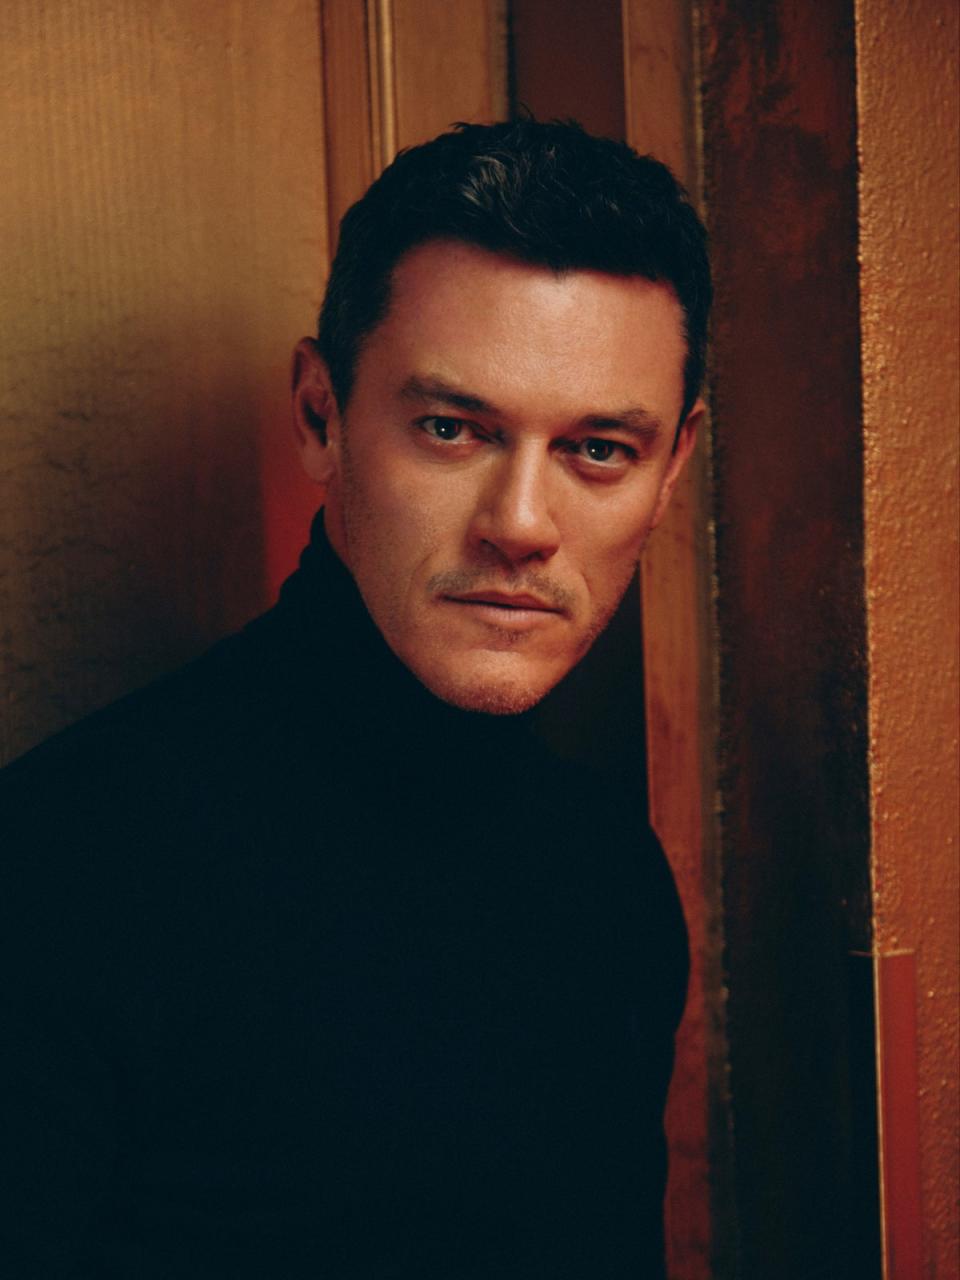 Luke Evans: ‘I like that feeling that there’s something bigger than us, when two people meet’ (Ed Cooke)